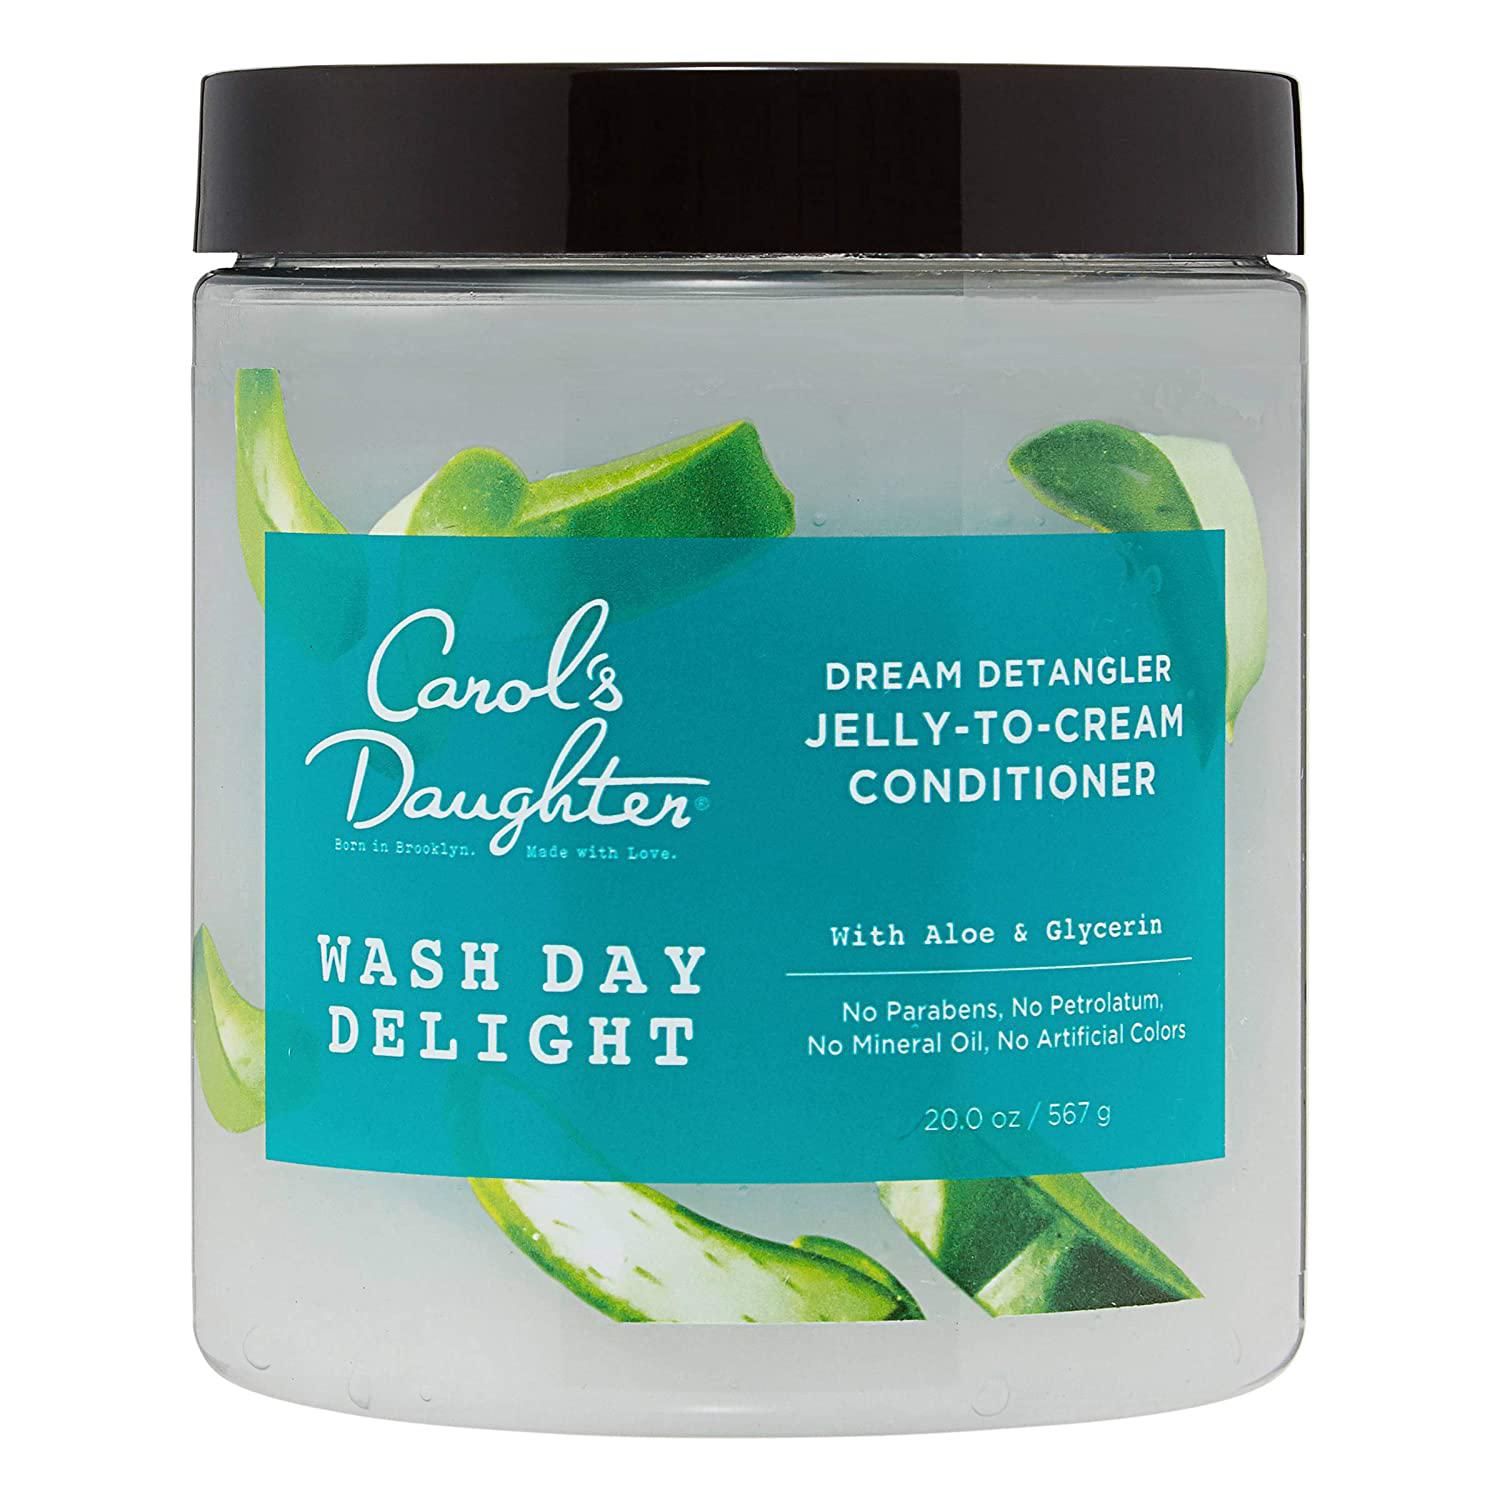 Wash Day Delight Detangling Jelly-to-Cream Moisturizing Conditioner